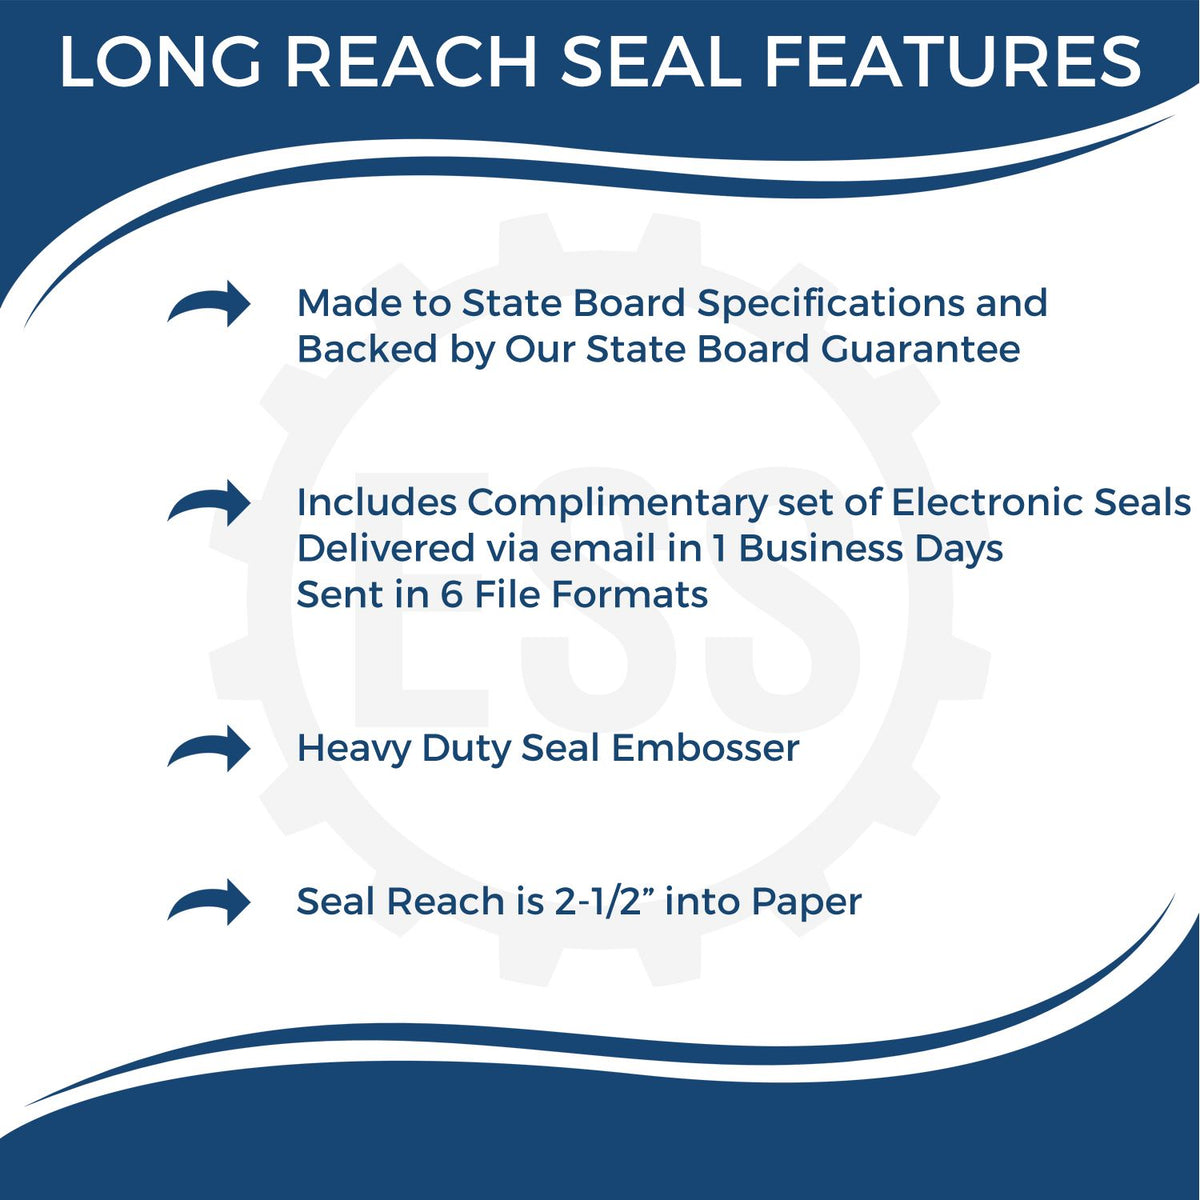 A picture of an infographic highlighting the selling points for the Long Reach Pennsylvania PE Seal